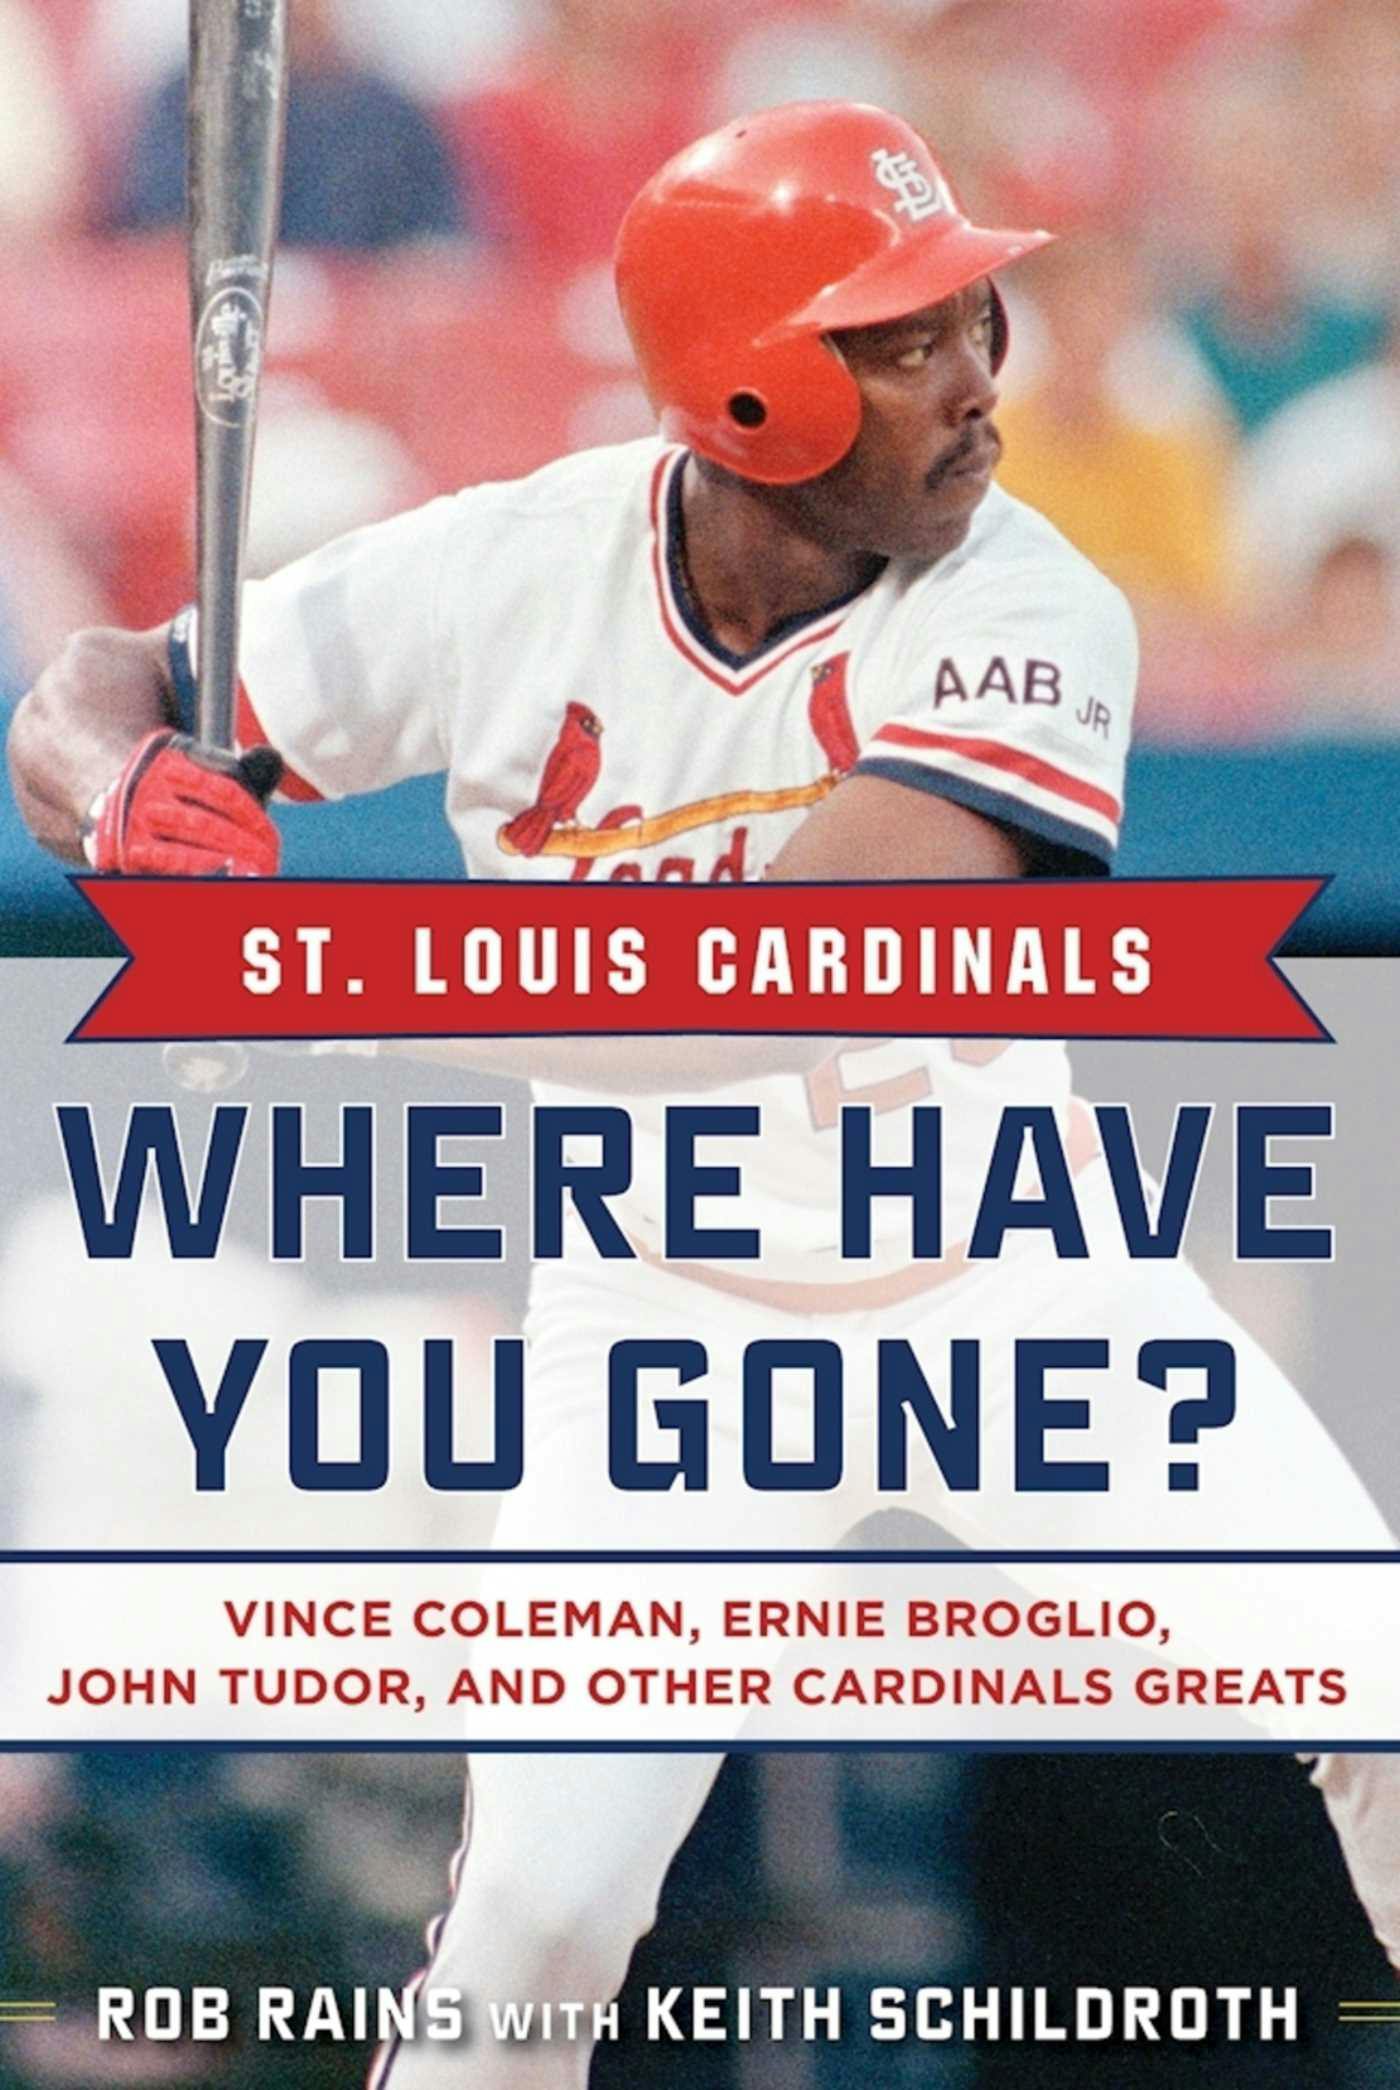 Whatever Happened to Vince Coleman??